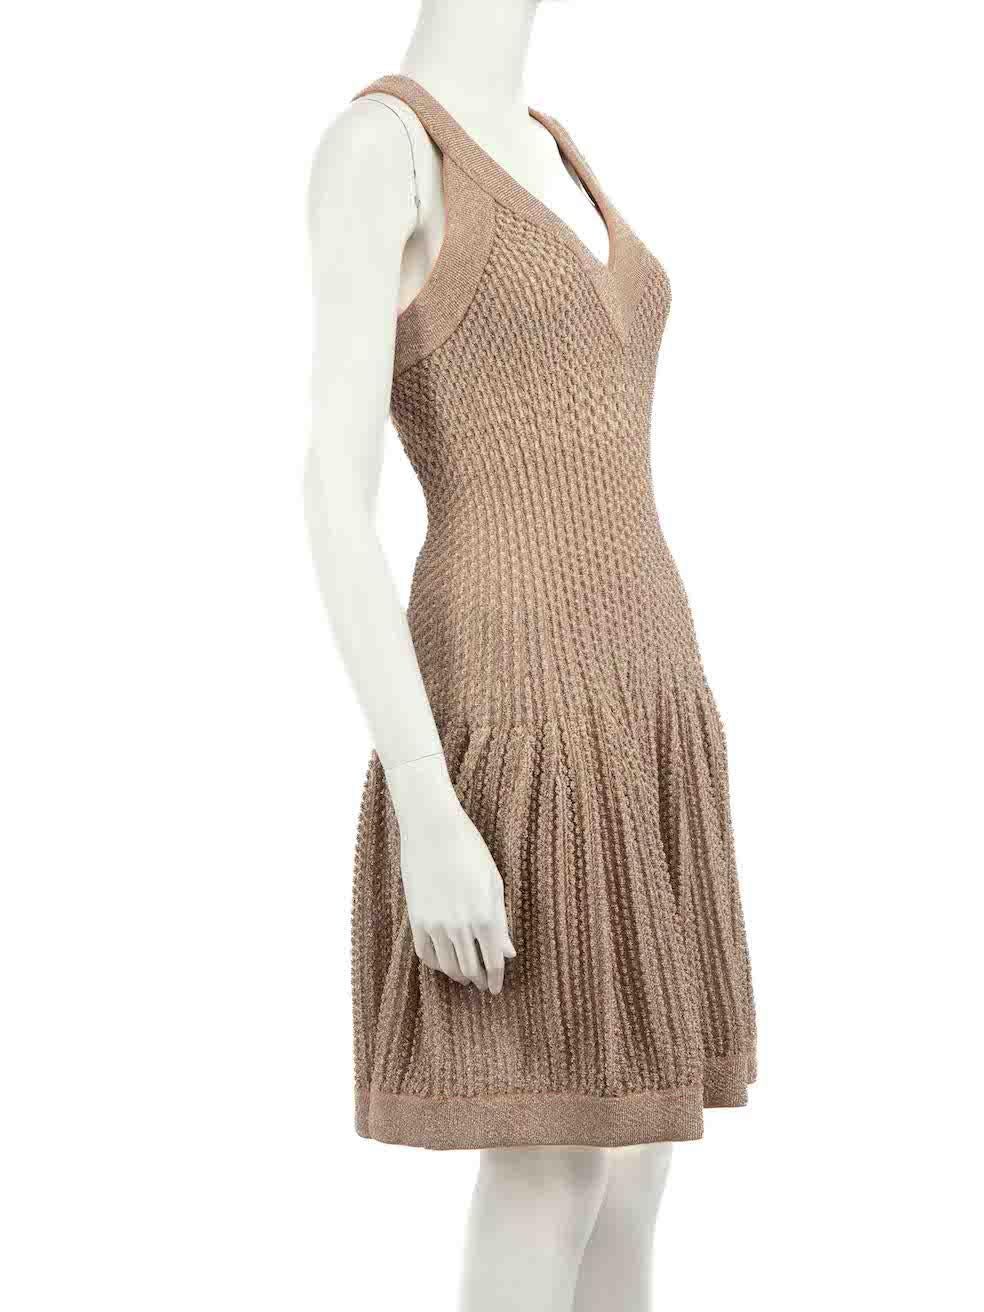 CONDITION is Very good. Hardly any visible wear to dress is evident on this used Alaïa designer resale item.
 
 
 
 Details
 
 
 Beige metallic
 
 Viscose
 
 Knit dress
 
 Sleeveless
 
 V-neck
 
 Dotted textured knit detail
 
 Mini
 
 Stretchy
 
